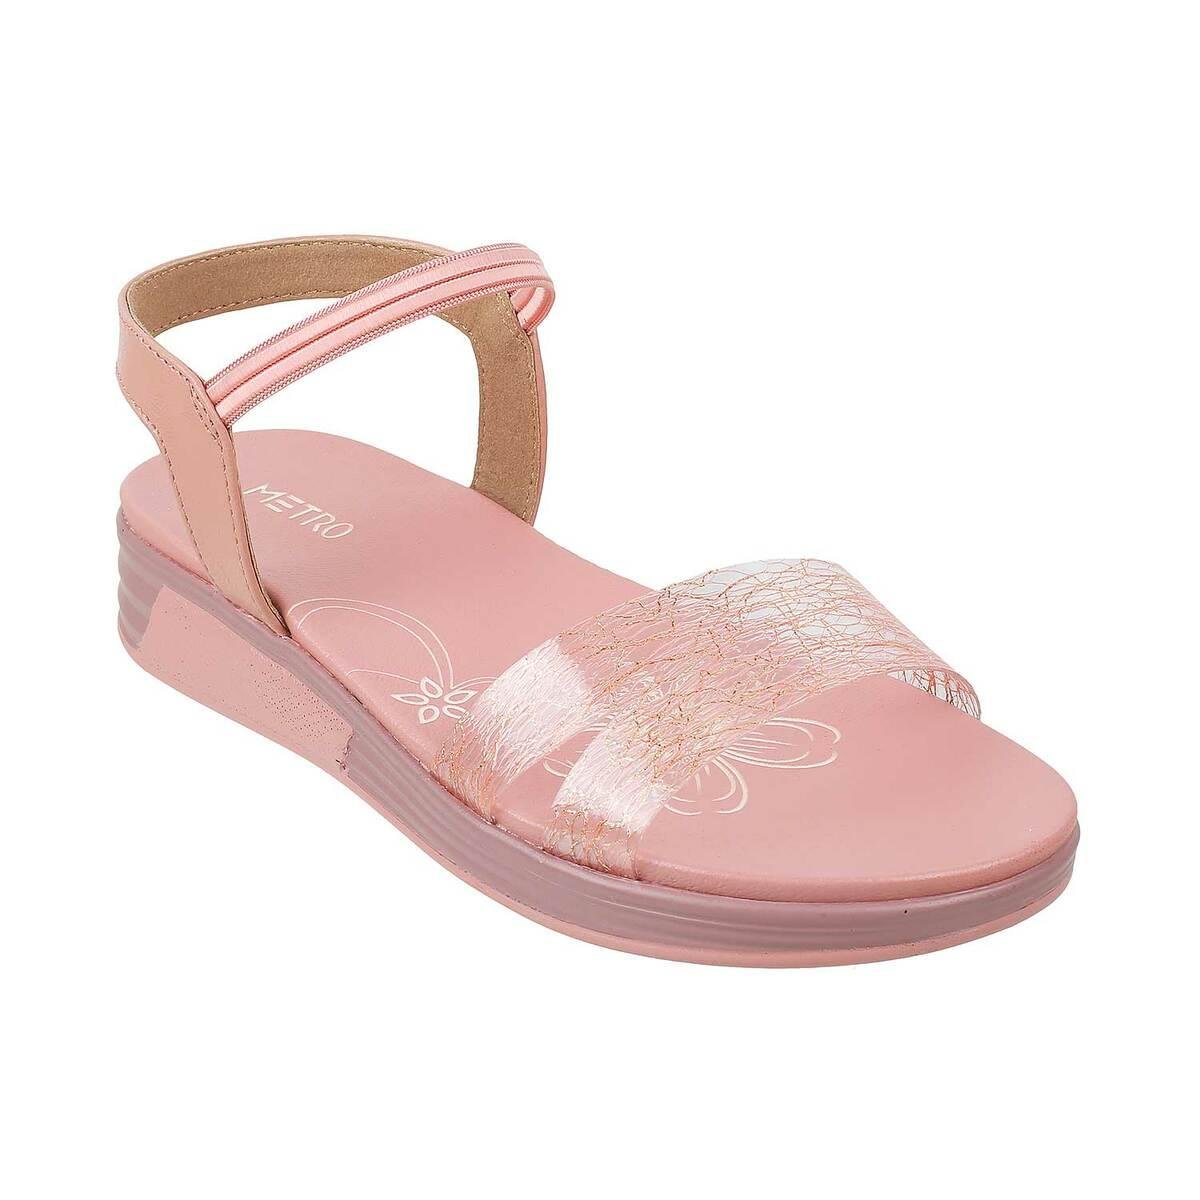 Pale Pink Shoes For Wedding | Pink Sandals For Wedding – Phoenix England